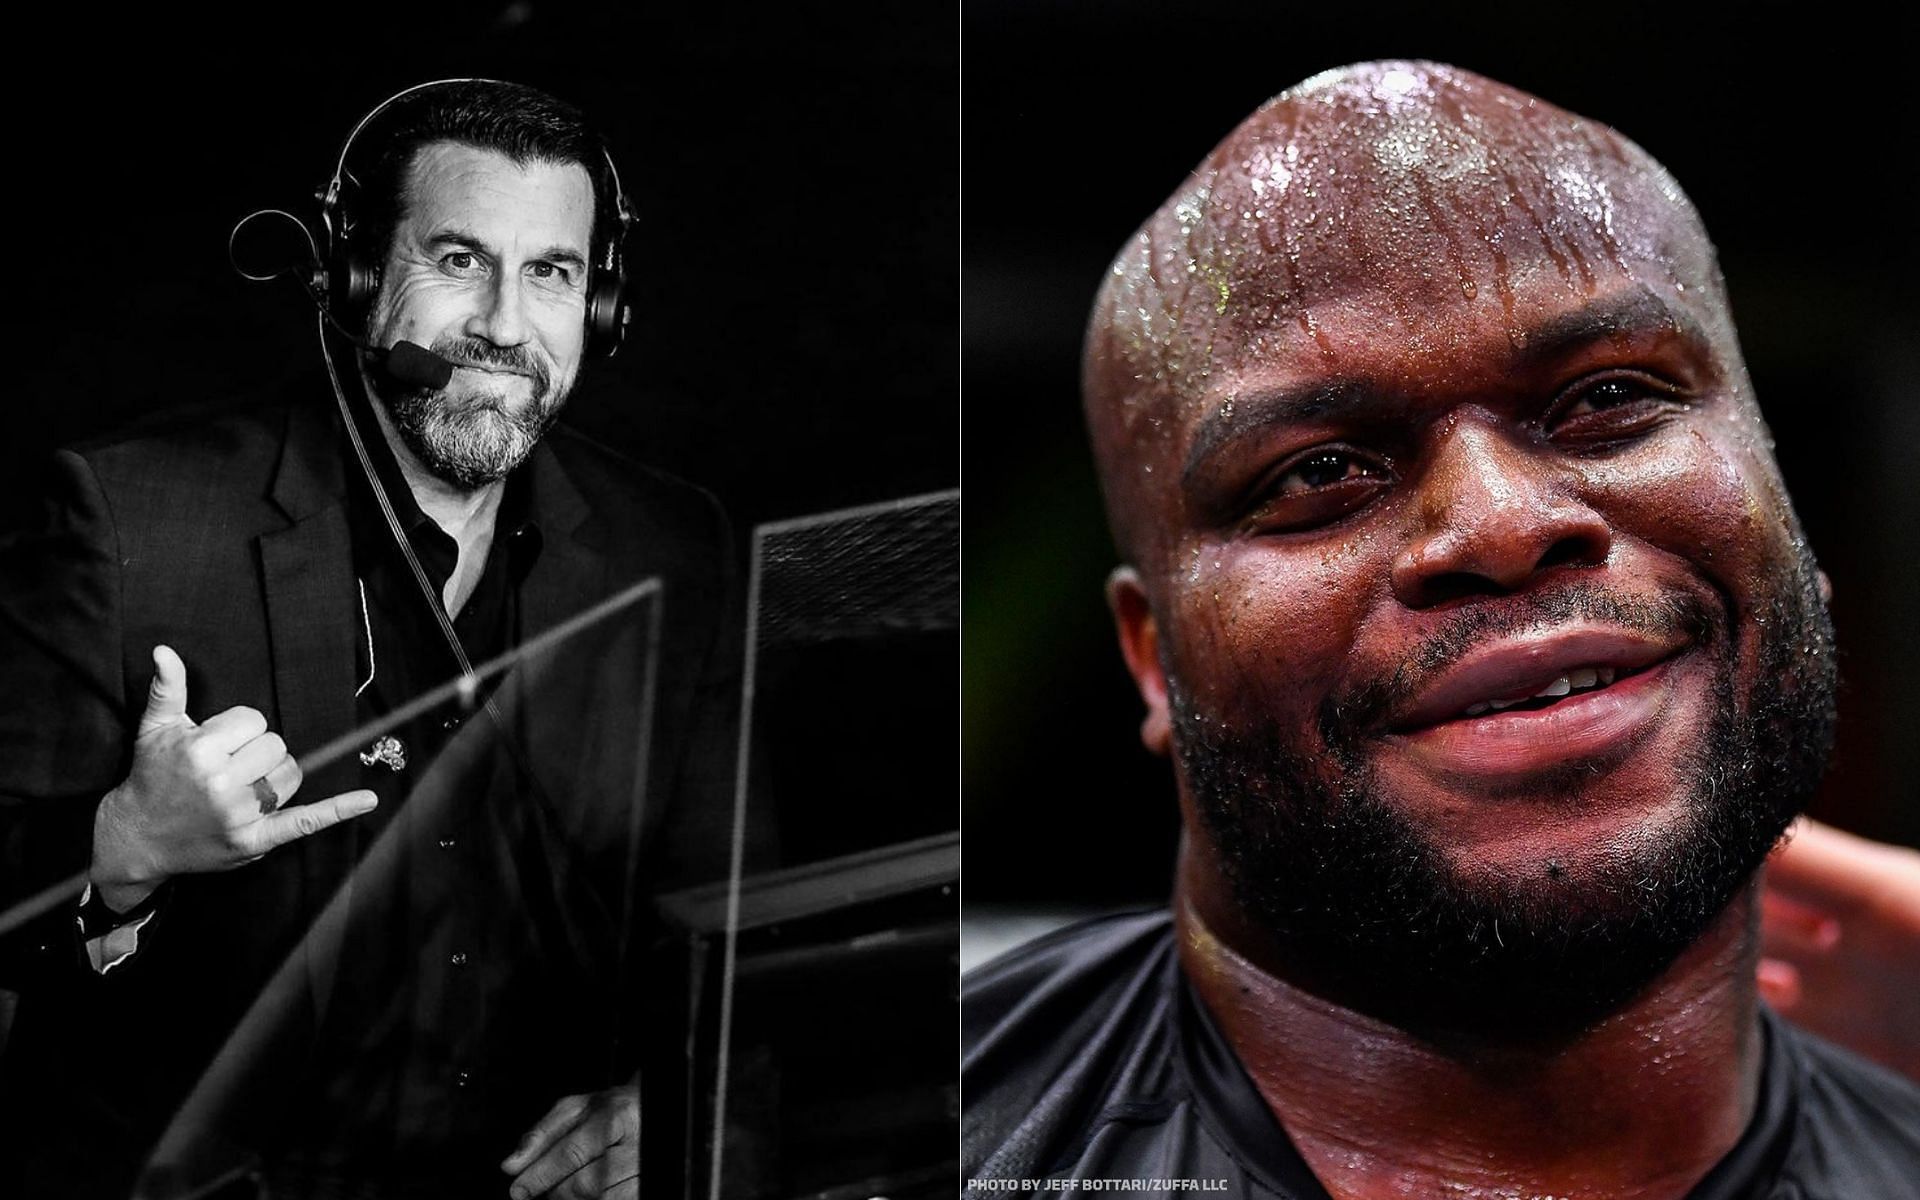 John McCarthy (left) and Derrick Lewis (right) [Image credits: @johnmccarthymma and @mmafighting on Instagram]